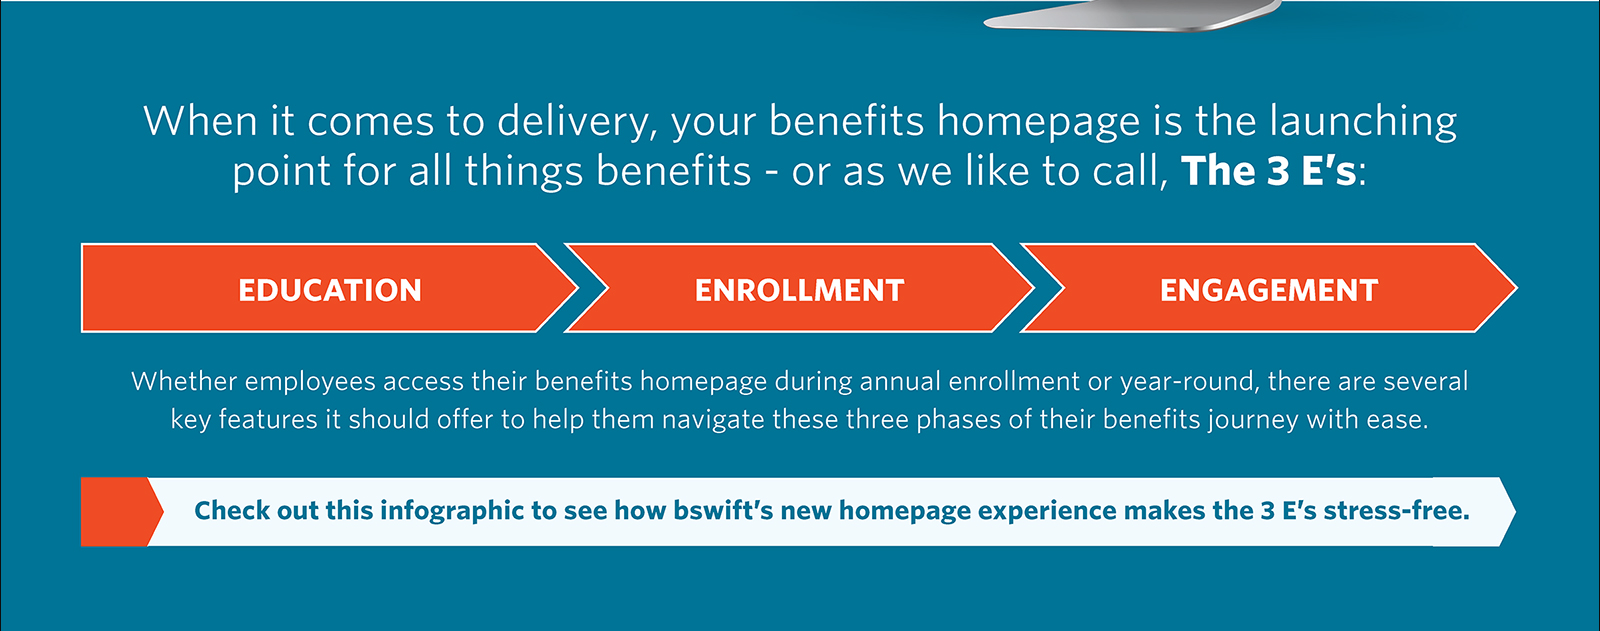 Check out this infographic to see how bswift’s new homepage experience makes the 3 E’s stress-free.